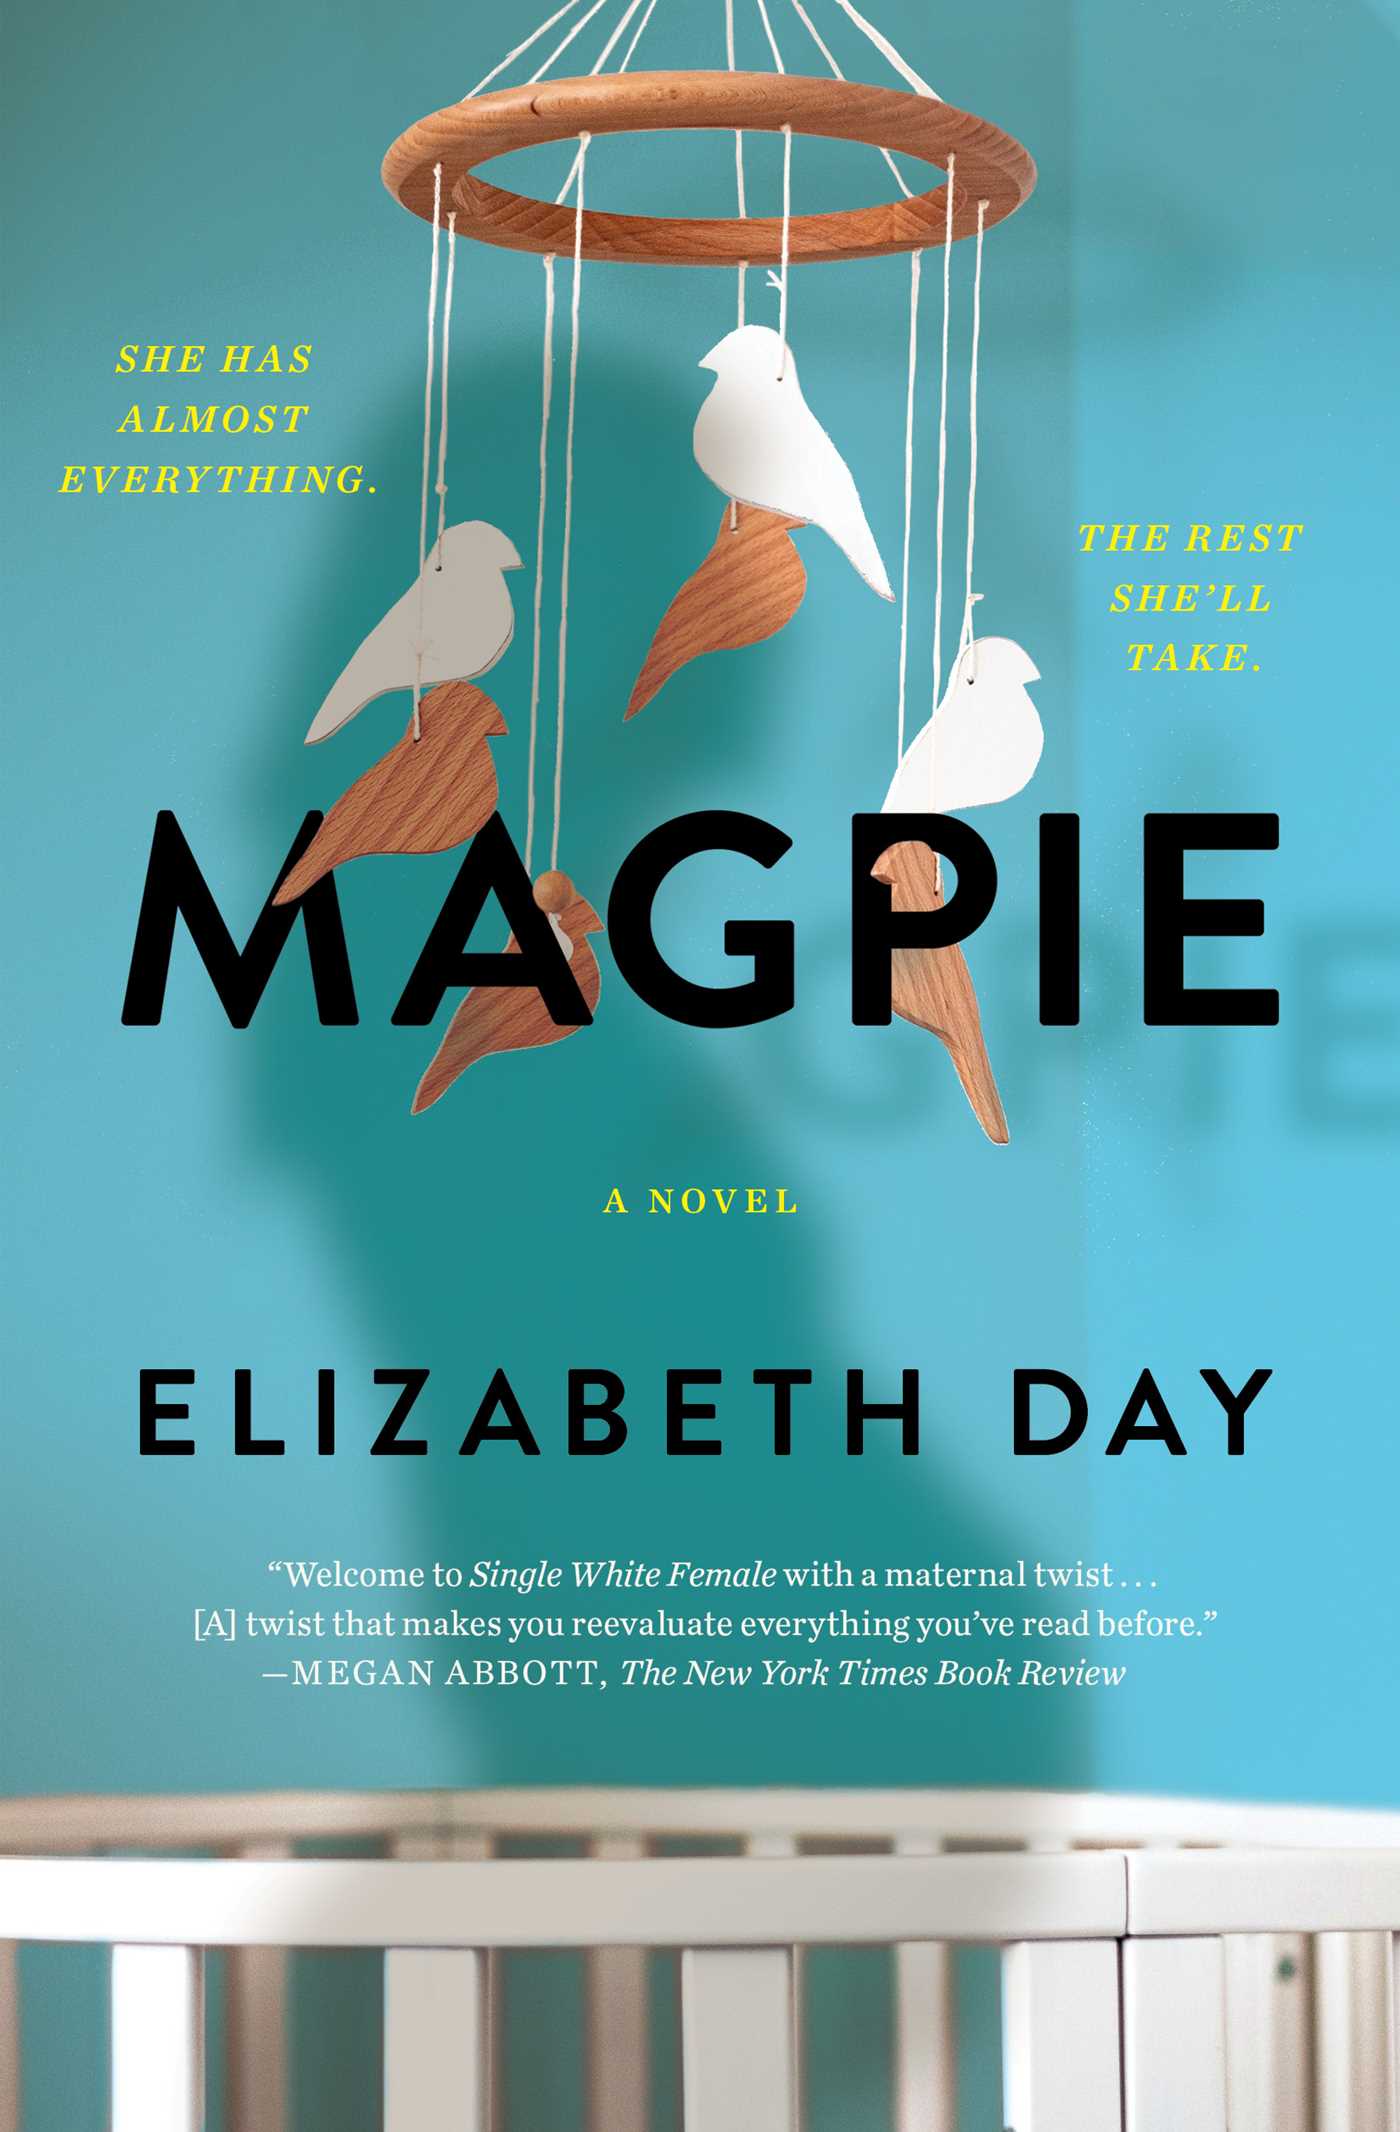 Magpie cover image